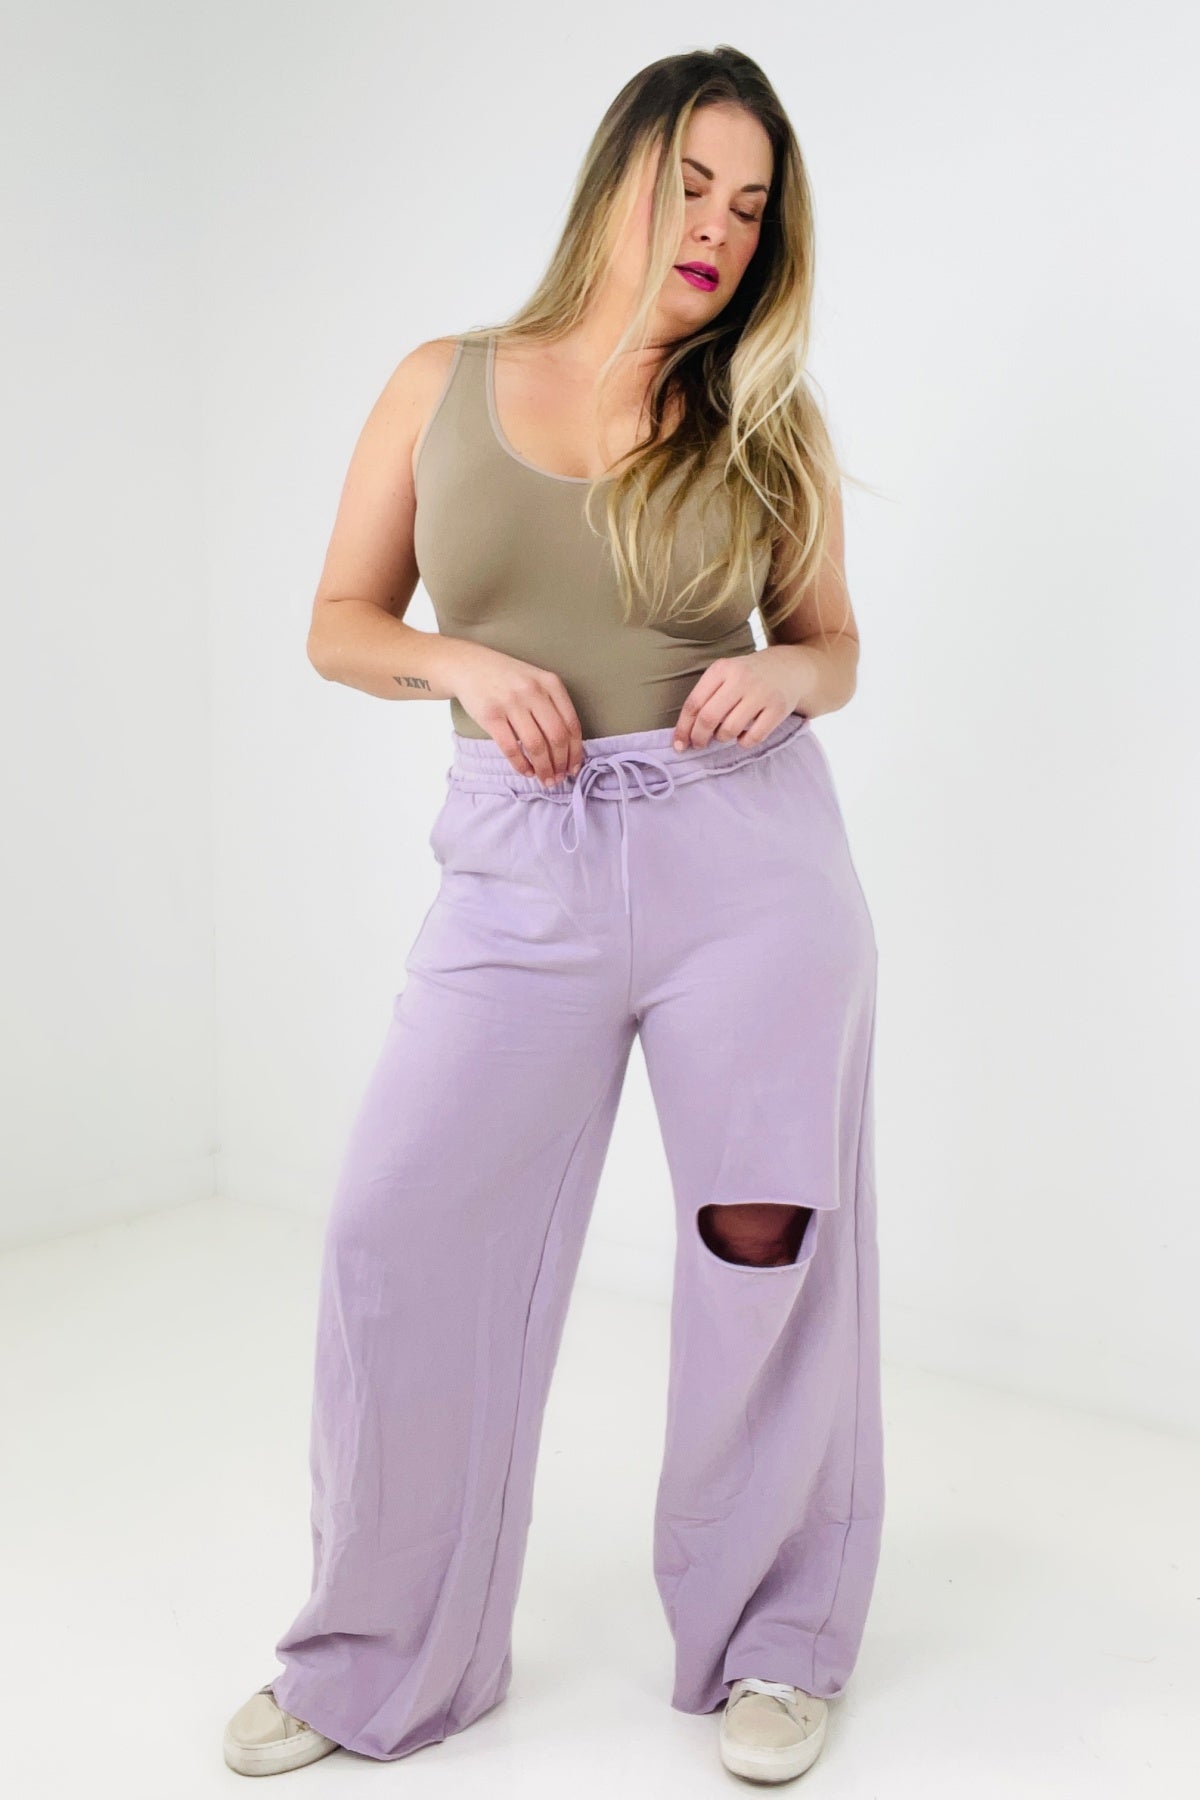 Distressed Knee French Terry Sweats With Pockets - New Colors